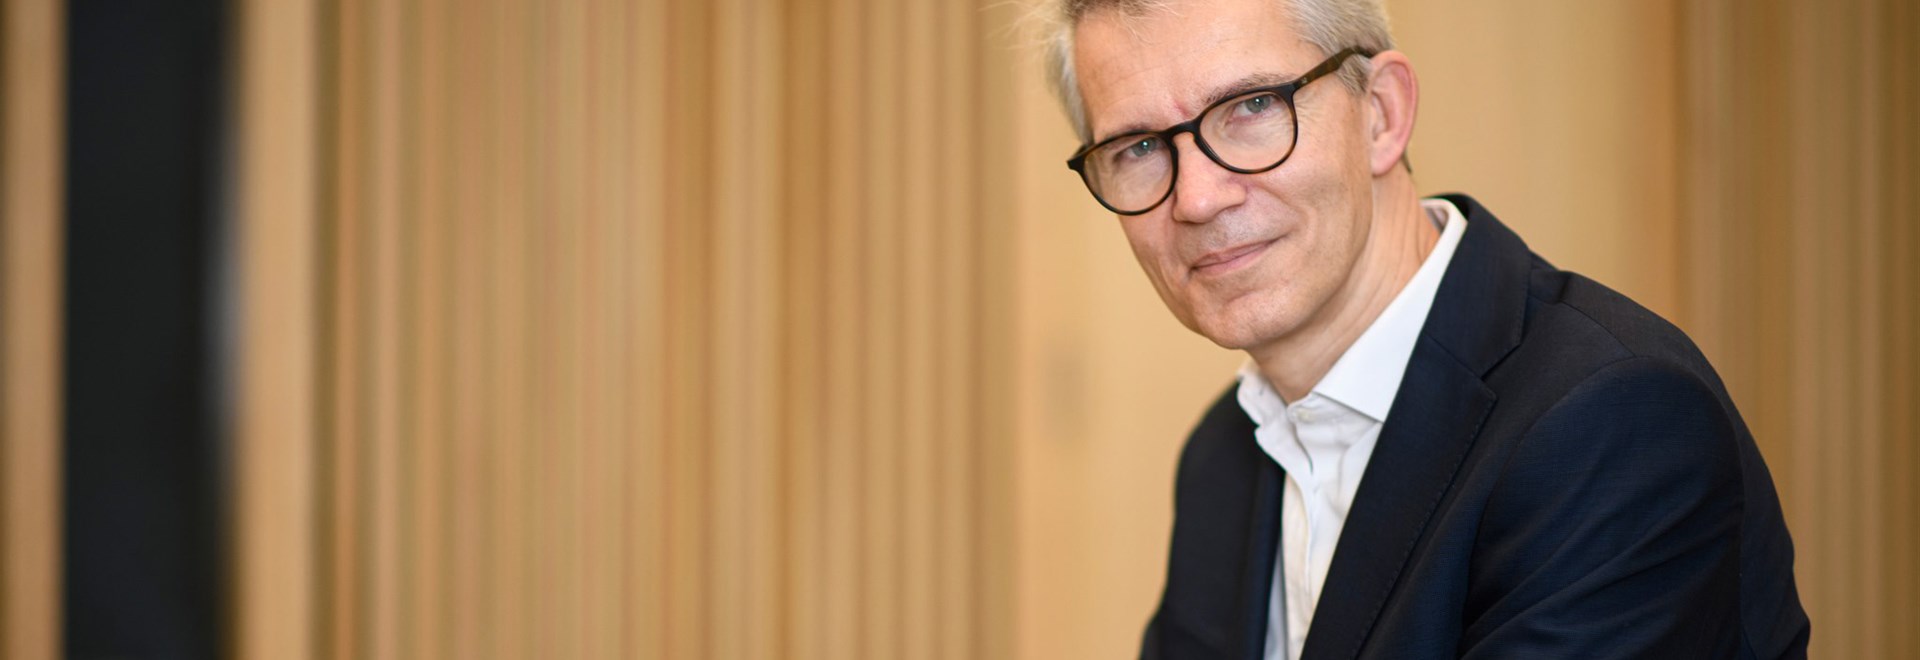 Baudouin Corlùy is the new Commercial Director at LCL